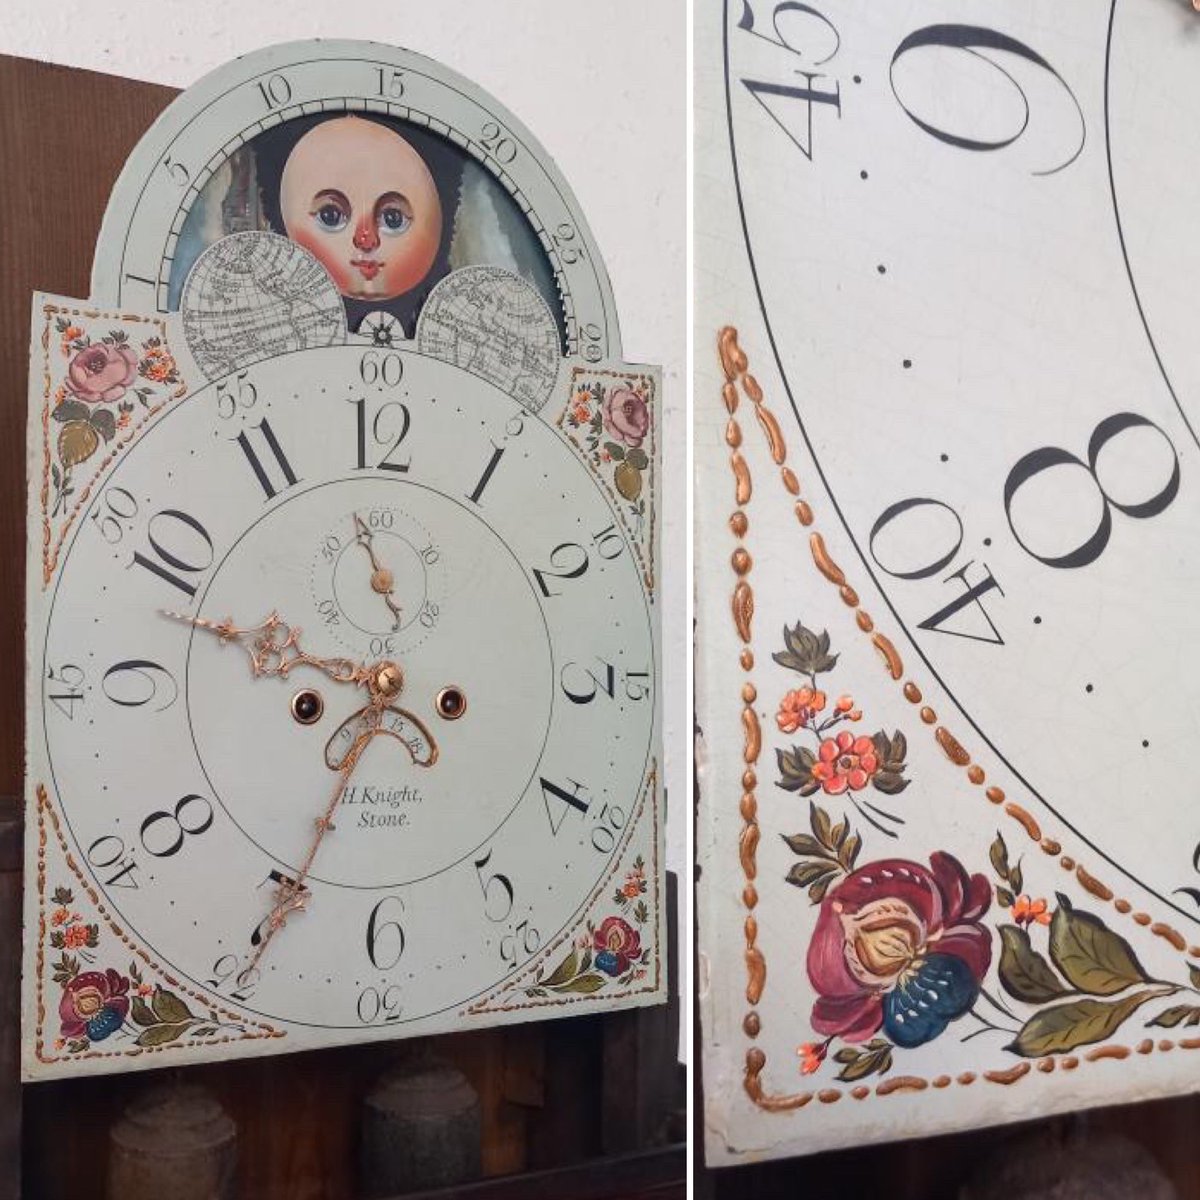 So, Uncle Phil - who owned the #Shoveit Chevette - also owned a short case Grand Father clock, which has now been fully restored by snowdonia_antiques in North Wales - the wood work & paintwork are now stunning! 🕰️👀

Watcha think to it? #grandfatherclock